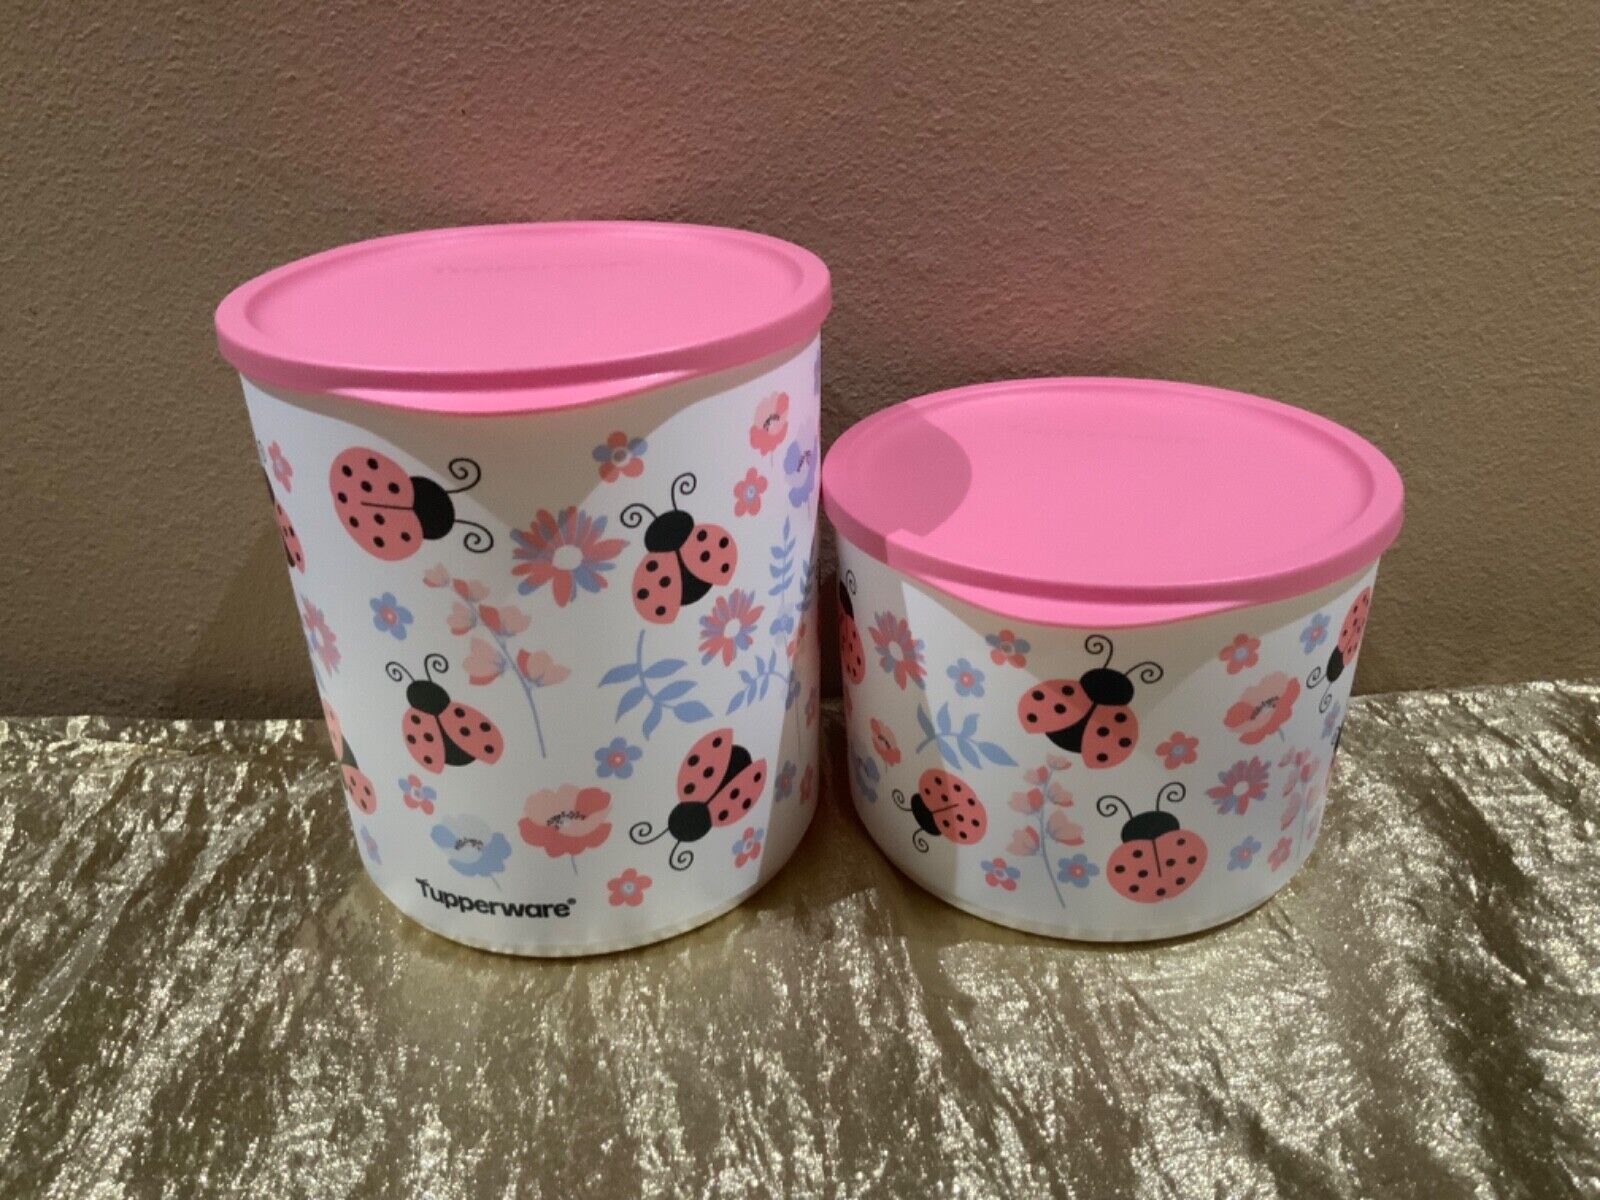 New UNIQUE Bright Tupperware Set/2 Cubix Round Pink Ladybugs Canisters 3.3, 2.1L